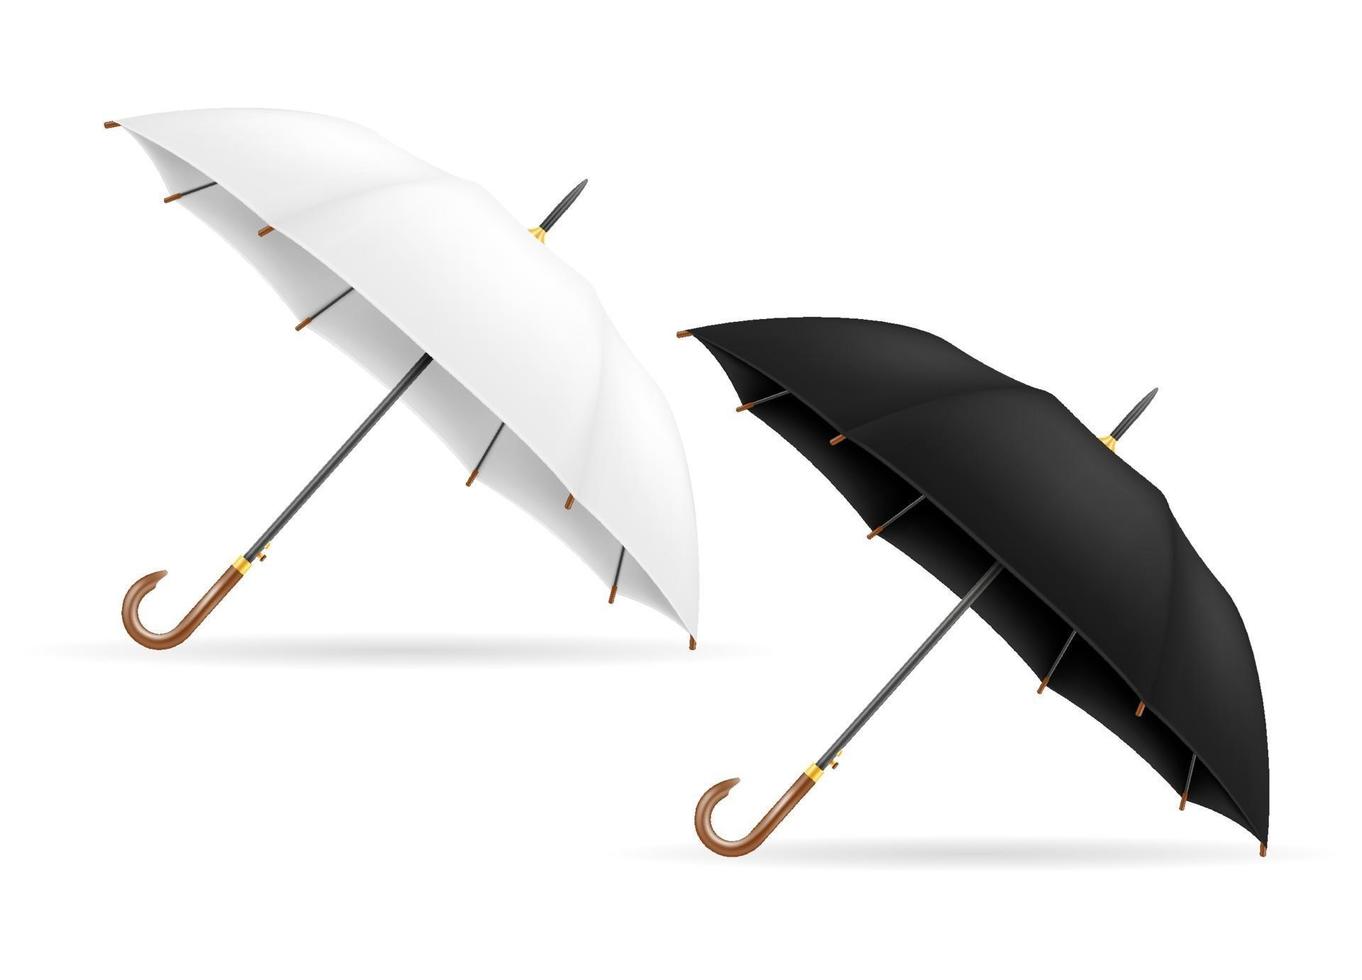 classical umbrella from rain stock vector illustration isolated on background